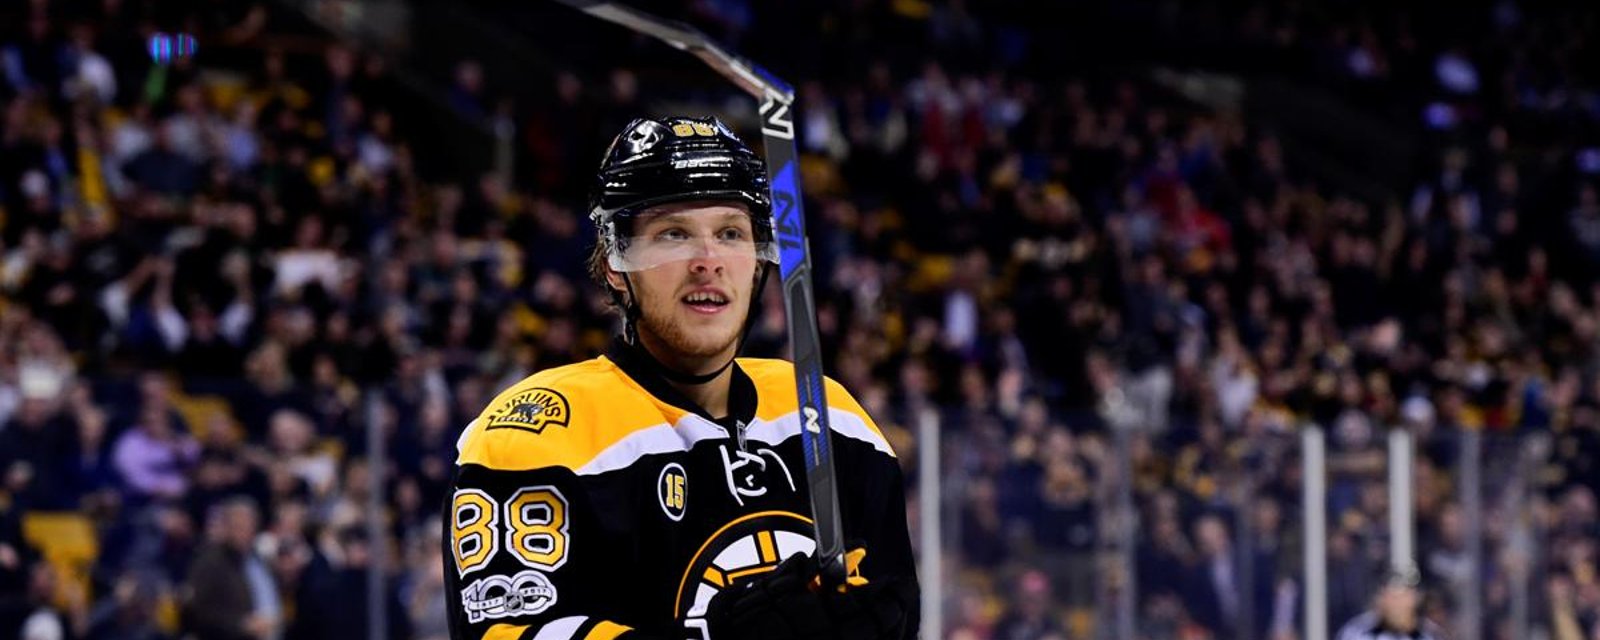 Bruins' in trouble next year with Pastrnak. 